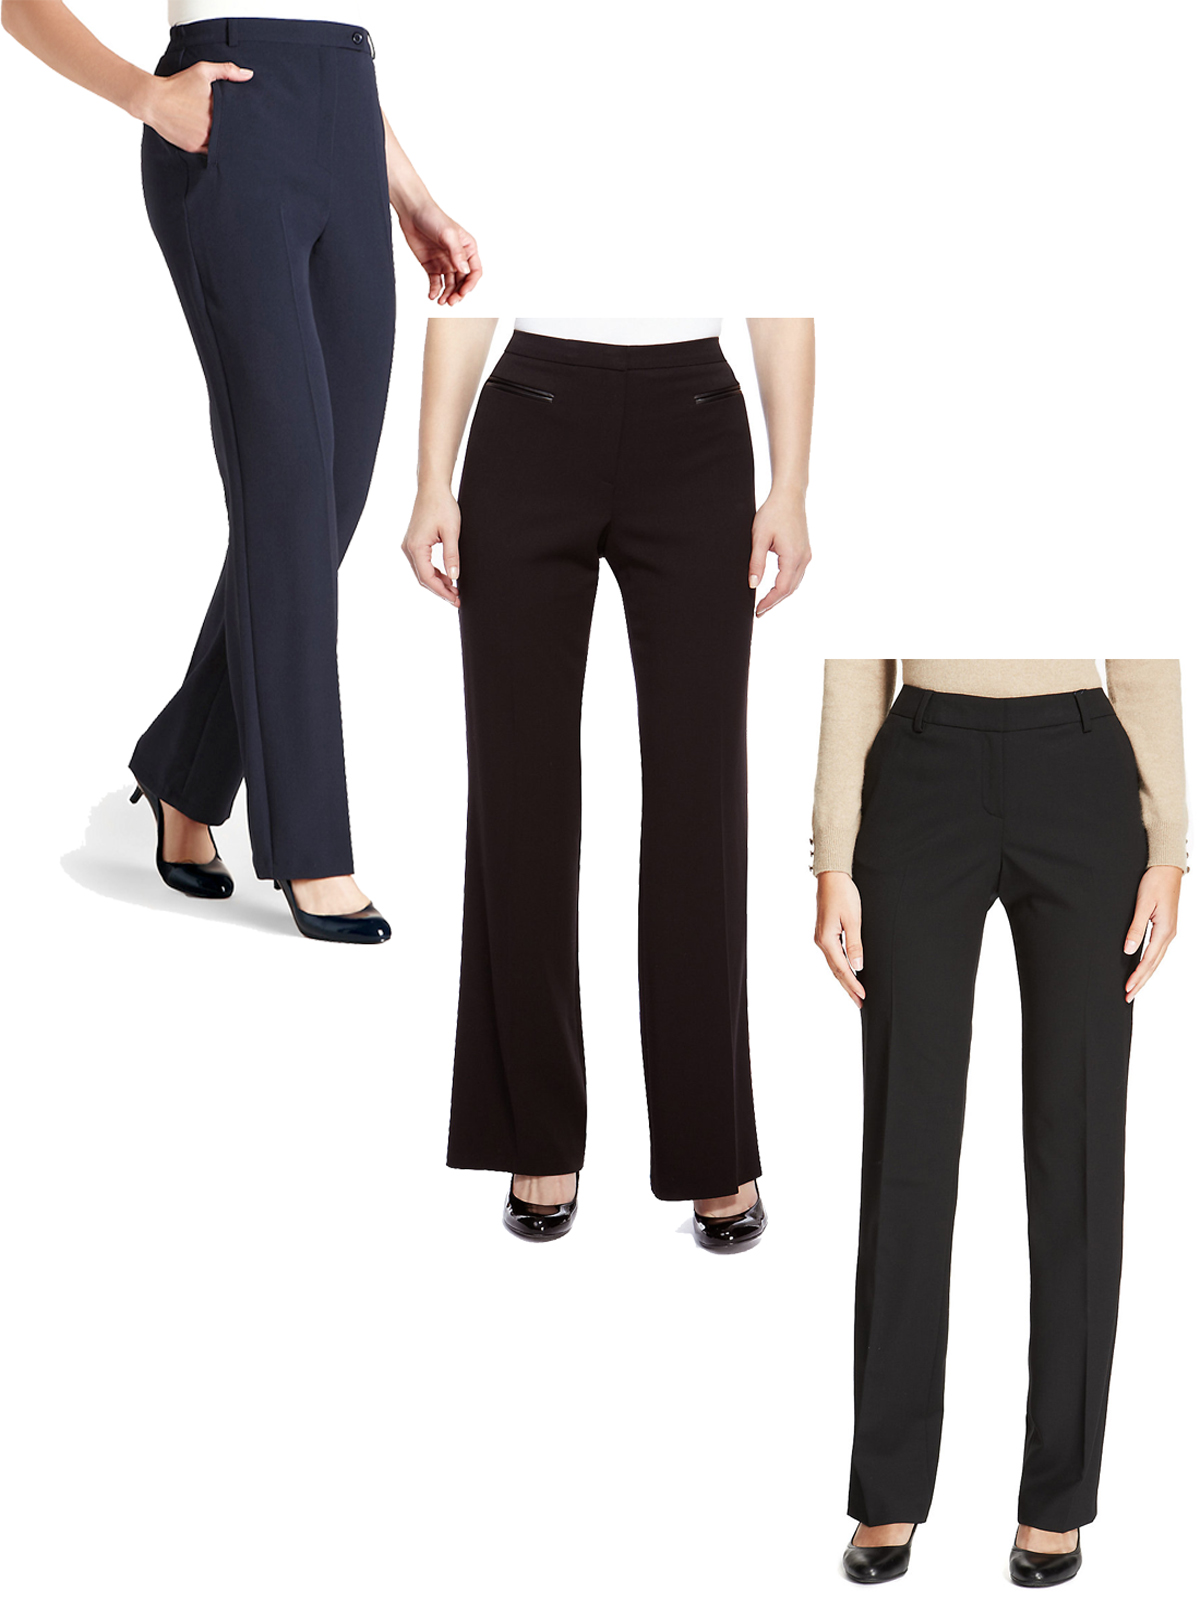 Marks and Spencer - - M&5 ASSORTED Ladies Trousers - Size 10 to 18